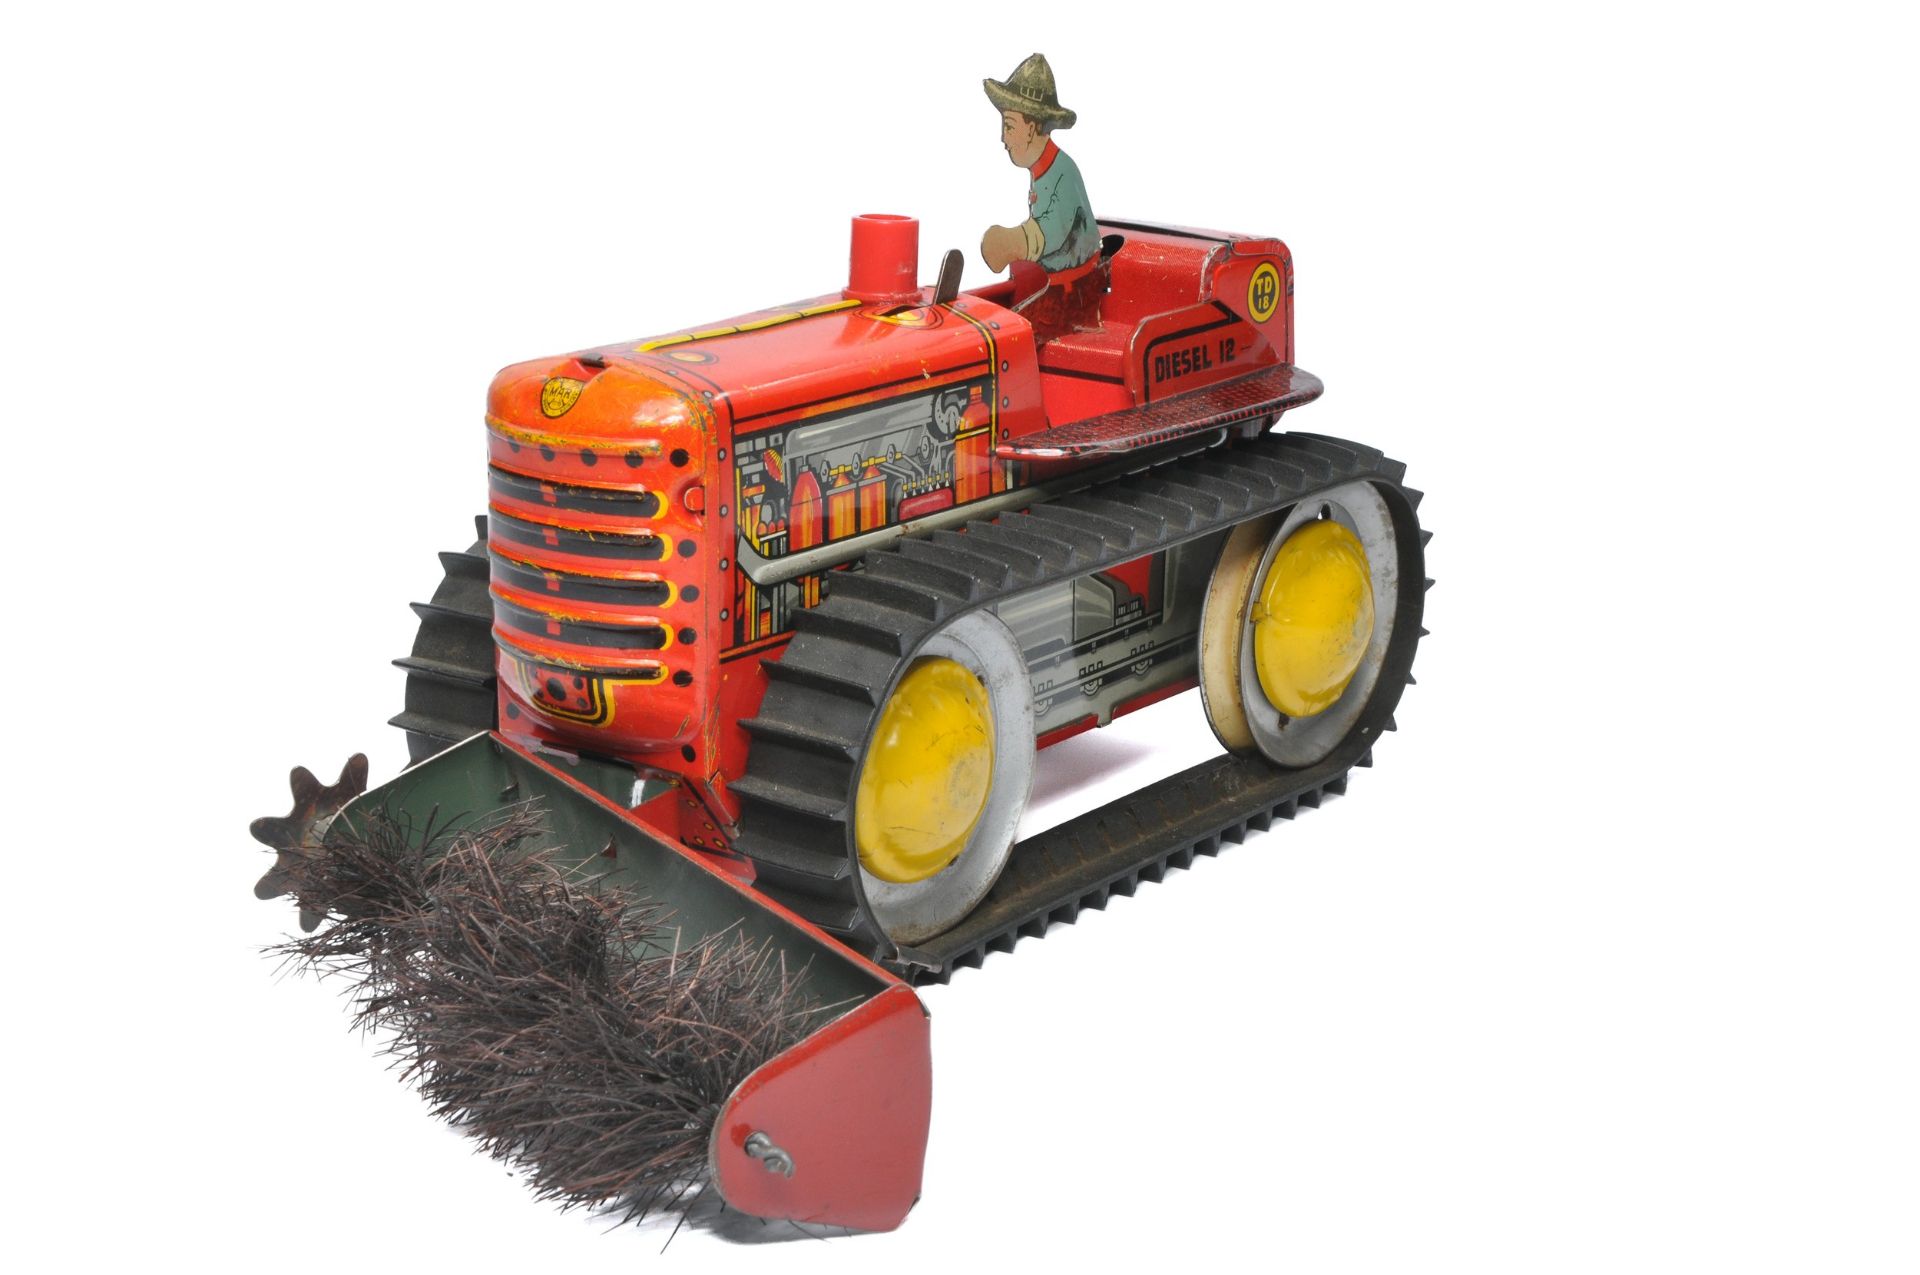 Marx (USA) 13 inch Litho printed Mechanical Tinplate Crawler Tractor with front brush attachment. In